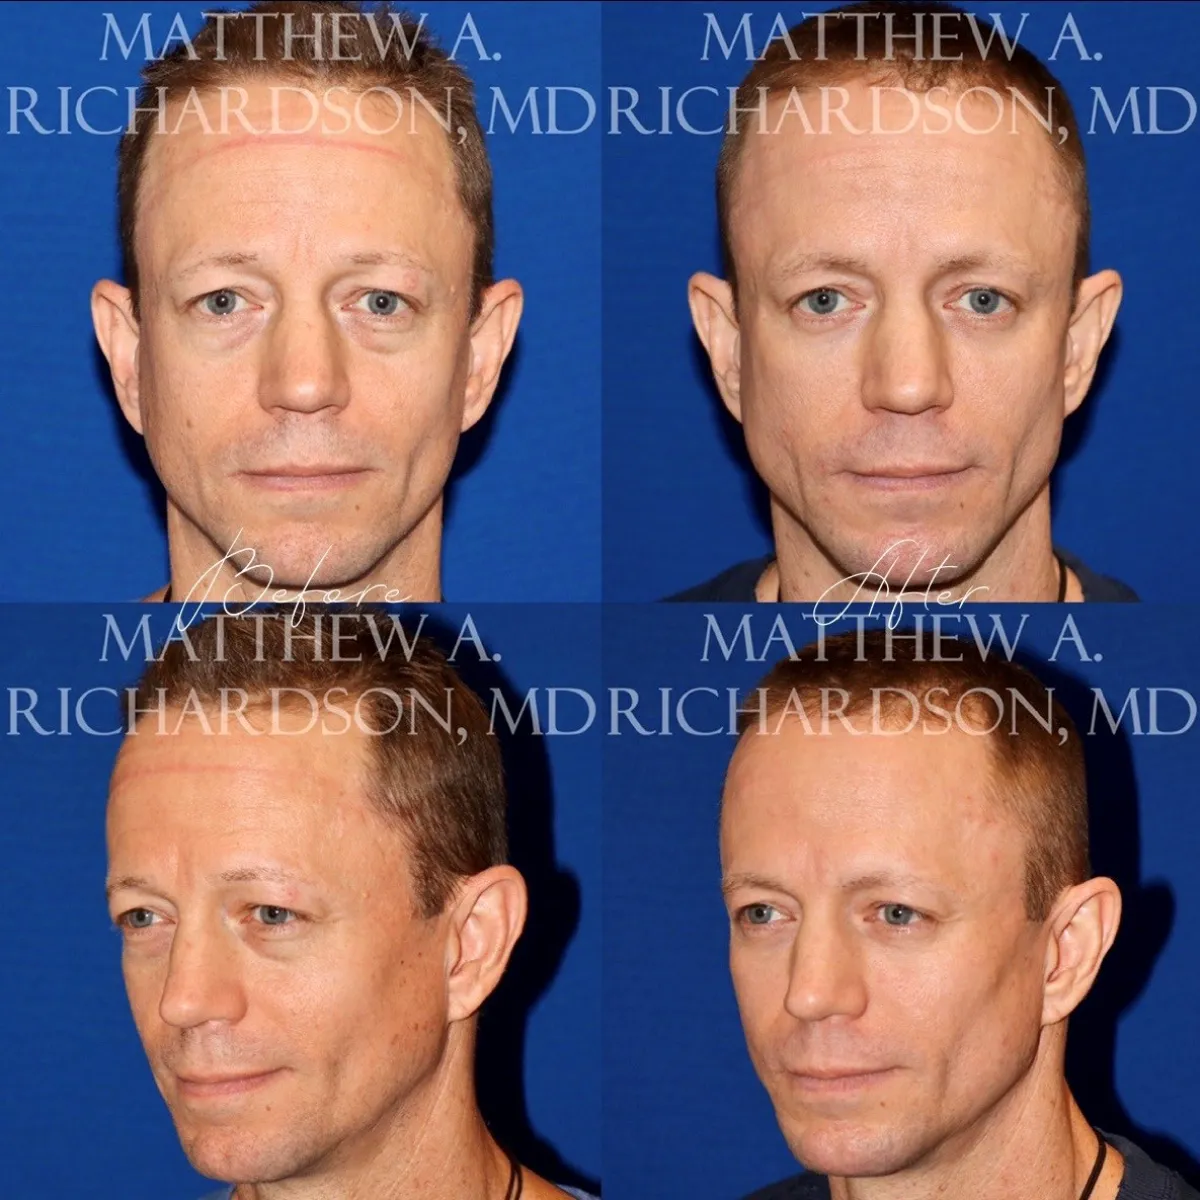 Cheek Augmentation Before After Photo Performed by Matthew A. Richardson, MD.